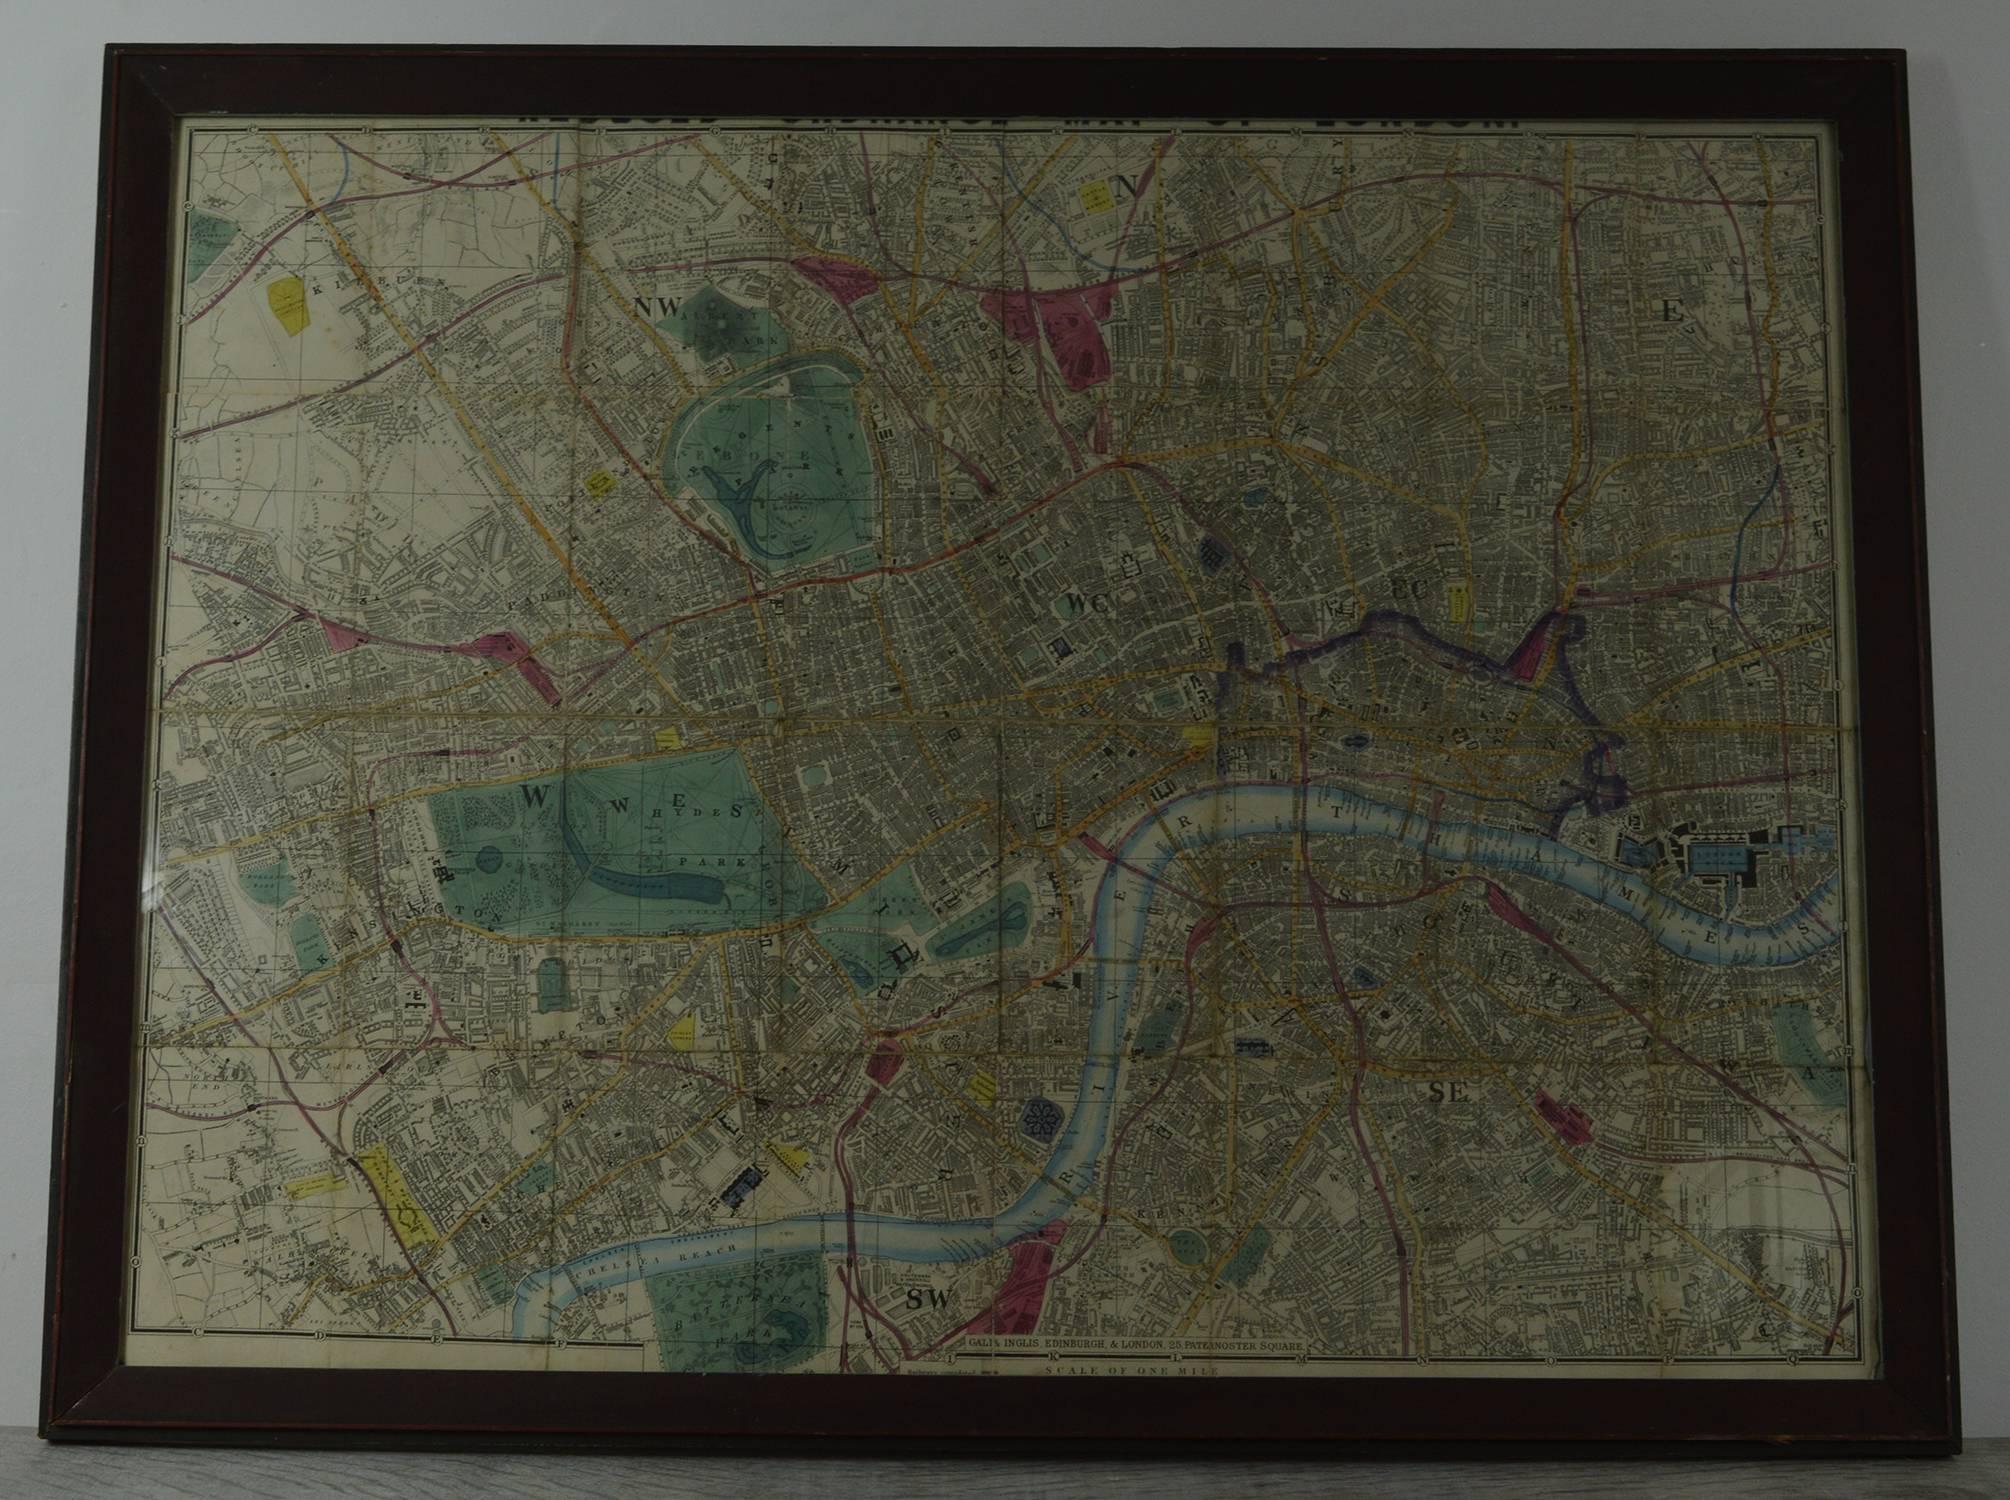 Fabulous colorful map of London in a glazed vintage frame.

Original color.

Not dated but estimated circa 1870.

Showing the area from Holland Park in the west to Southwark Park in the east.
 